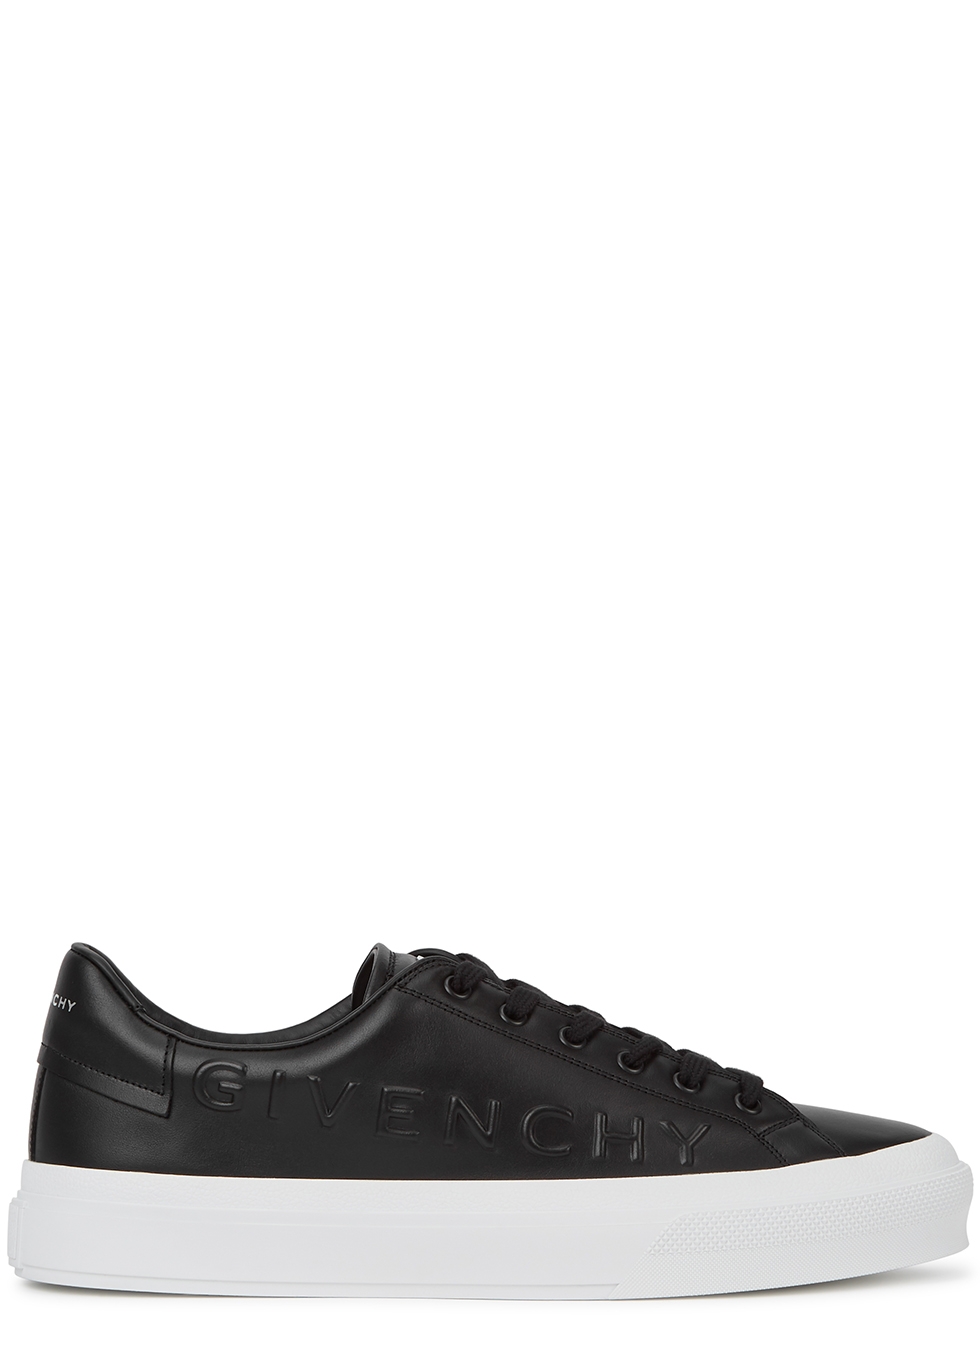 Givenchy City Sport black leather sneakers